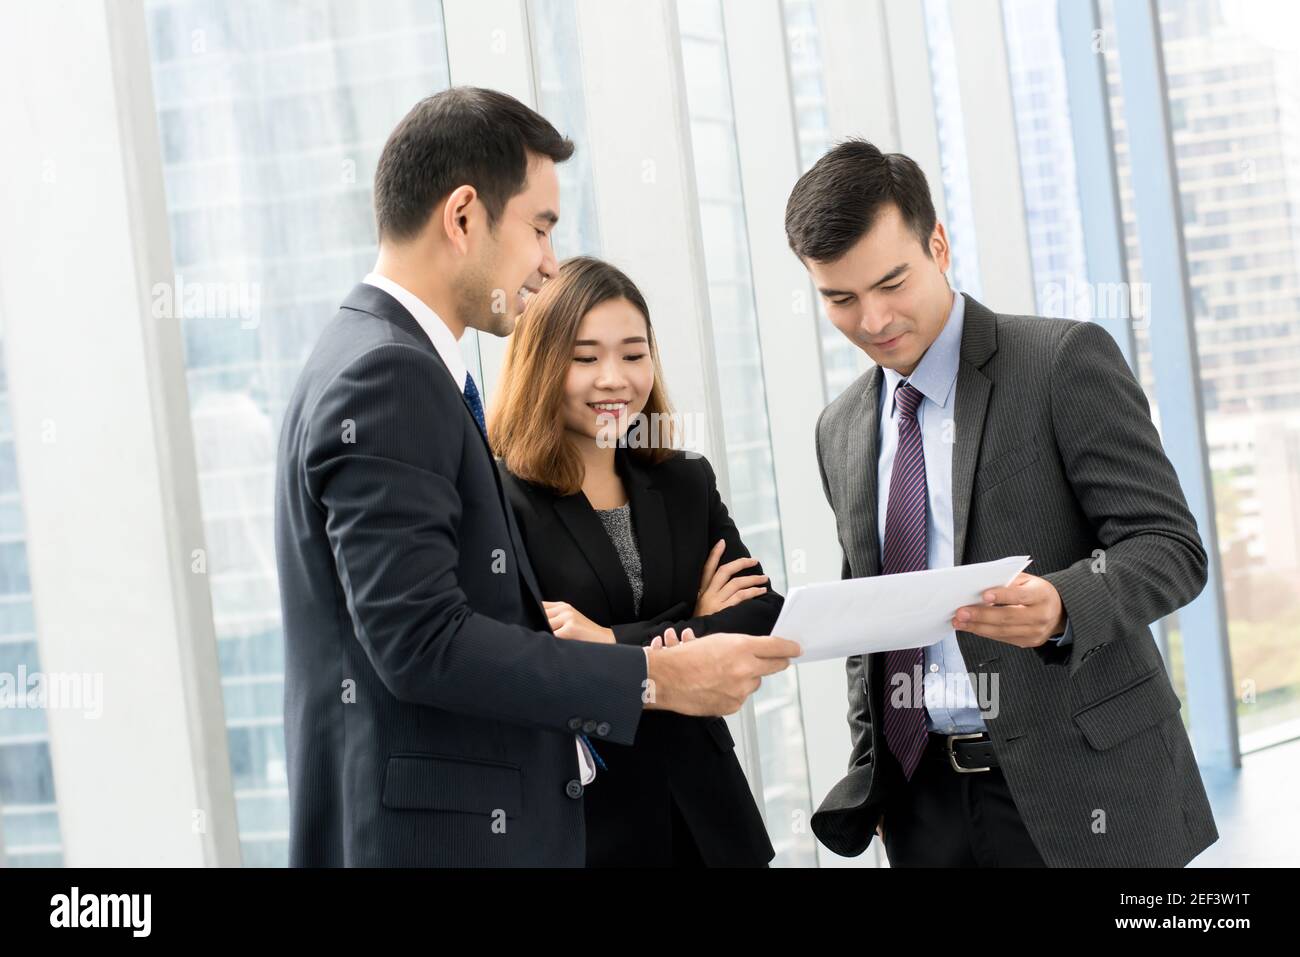 Group of business people discussing work at building hallway Stock Photo